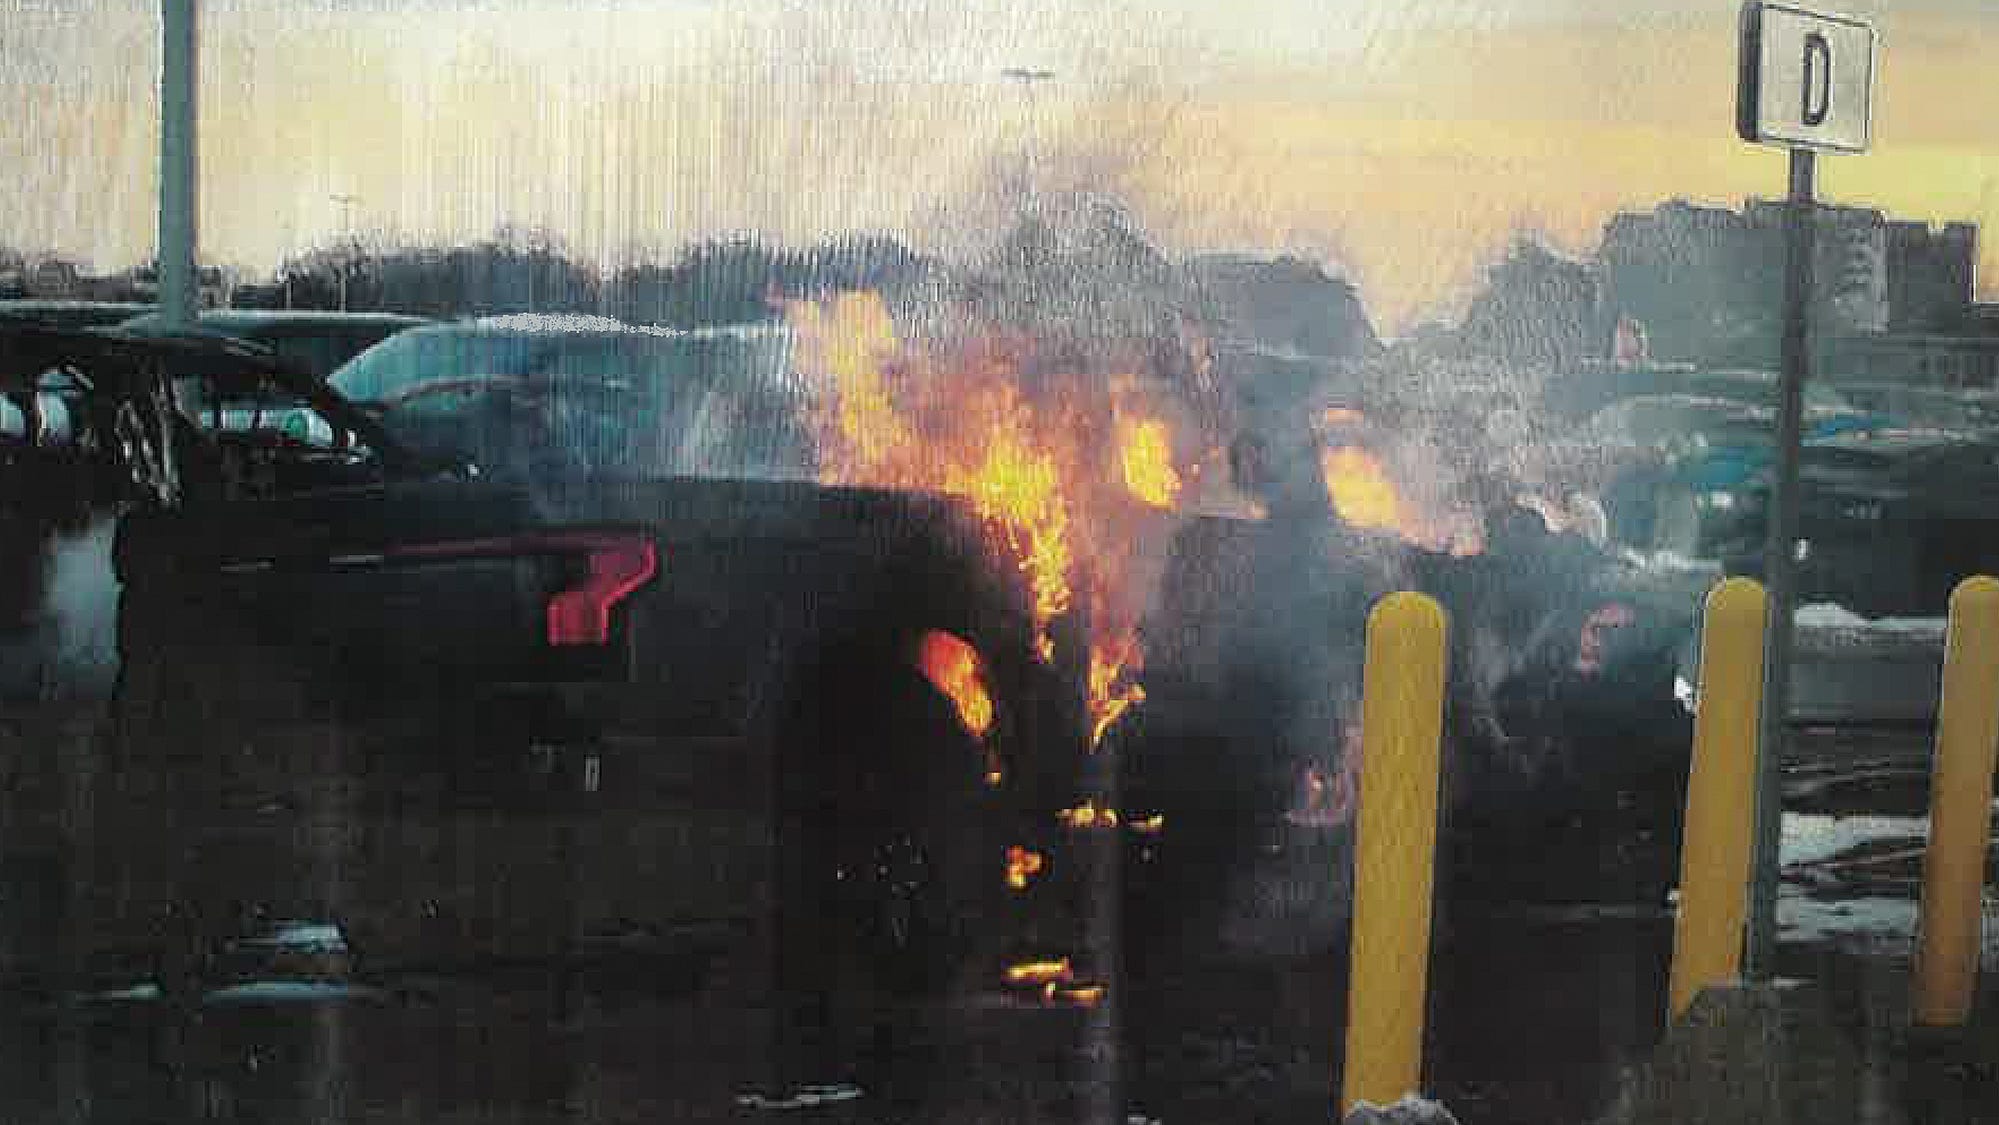 Images of the February battery fire damage to all-electric Ford F-150 pickup trucks in a Dearborn holding lot. Dearborn police and fire personnel responded to the incident, which involved three electric vehicles and no injuries and resulted in a five-week production shutdown.